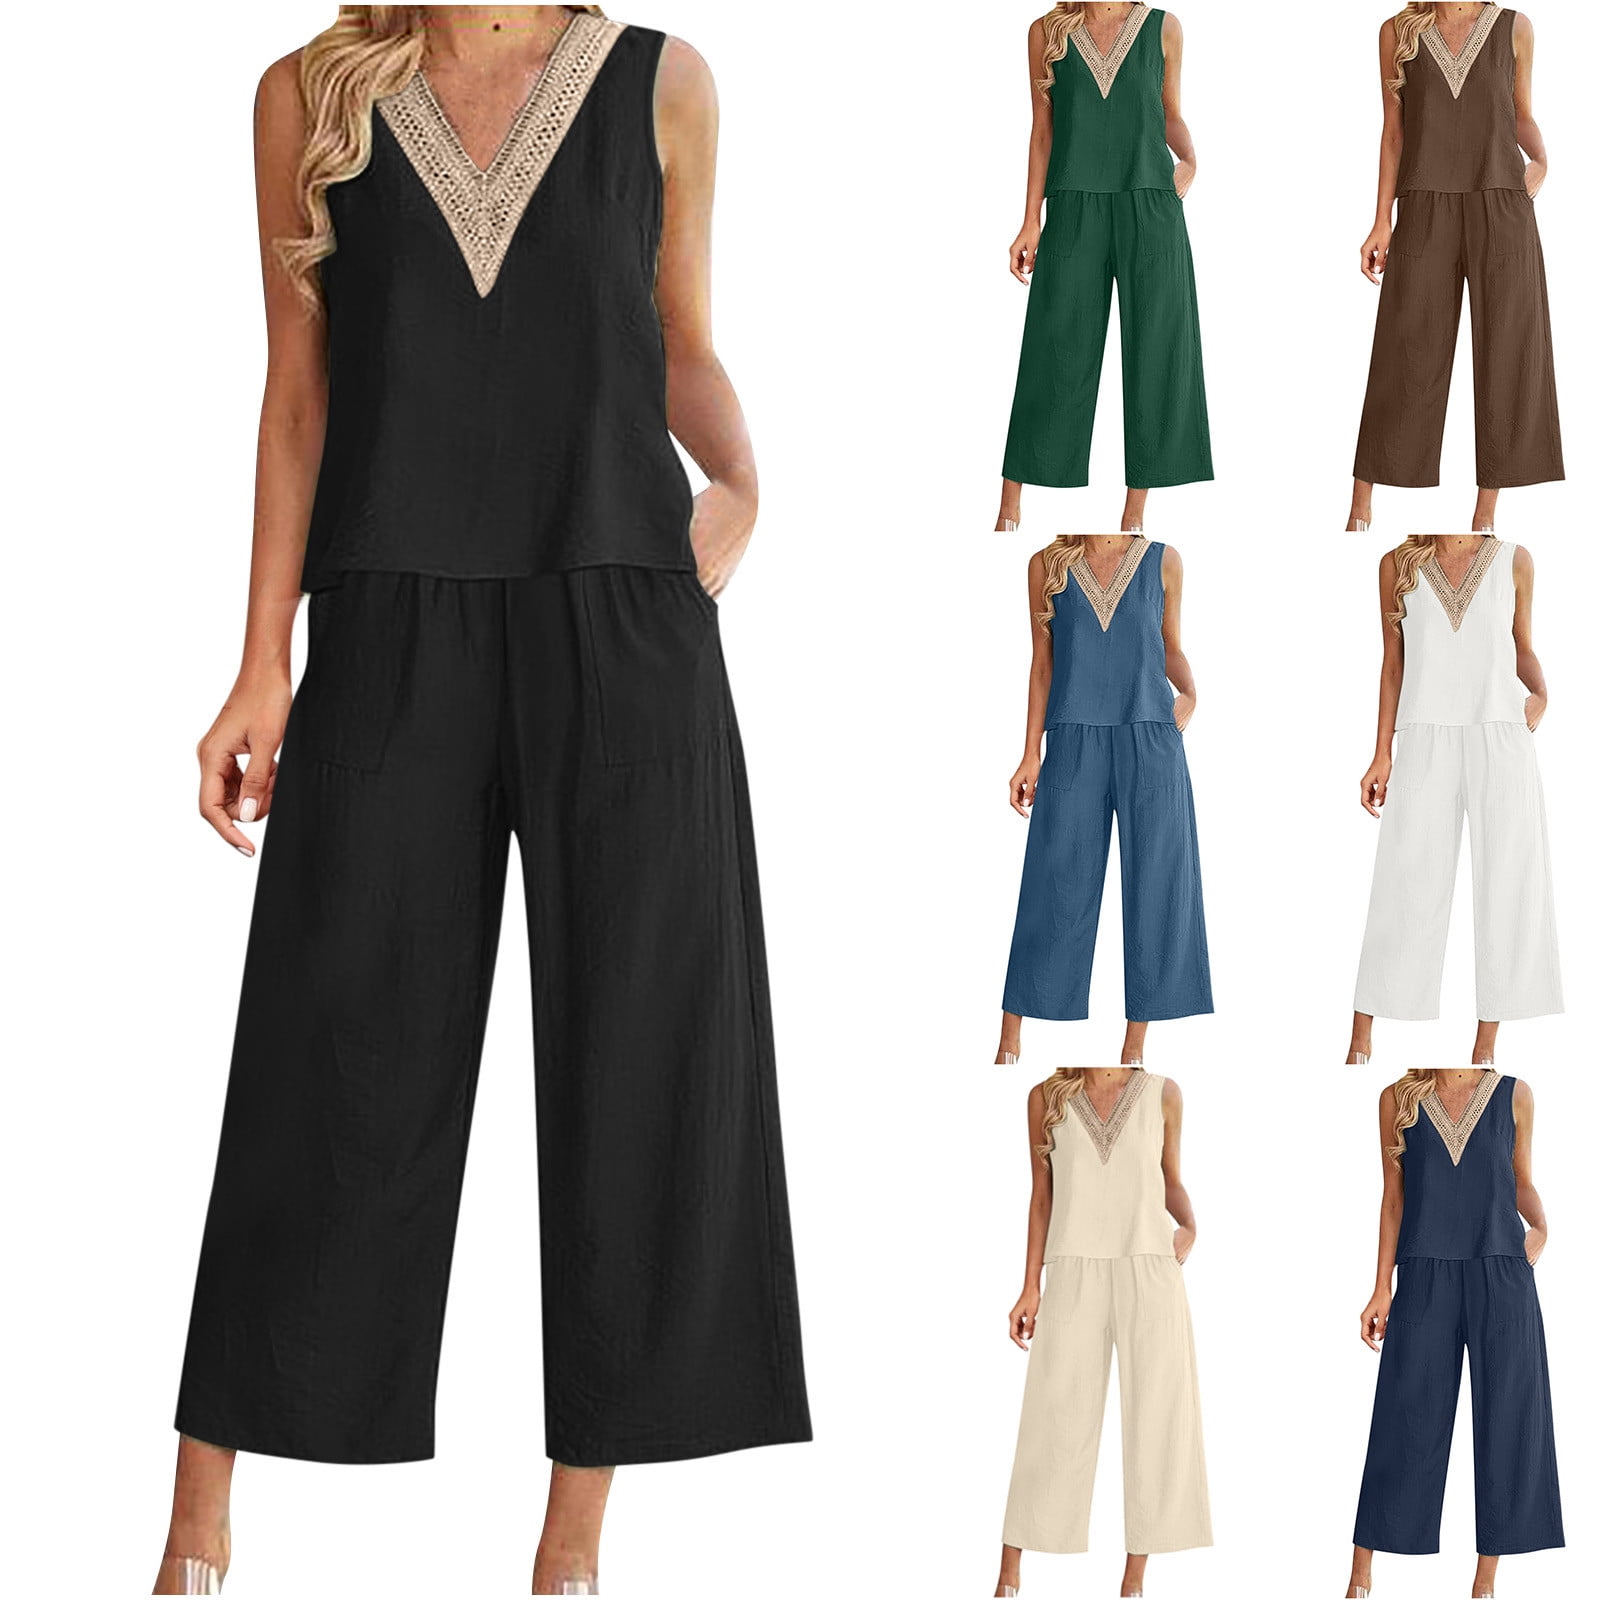 Summer Saving Clearance Jumpsuit Xihbxyly Two Piece Outfits for Women  Summer, Women's V-Neck Solid Sleeveless Top Loose Pocket Pants Suit Wide  Leg Pants Matching Sets with Pockets Blue XXXL